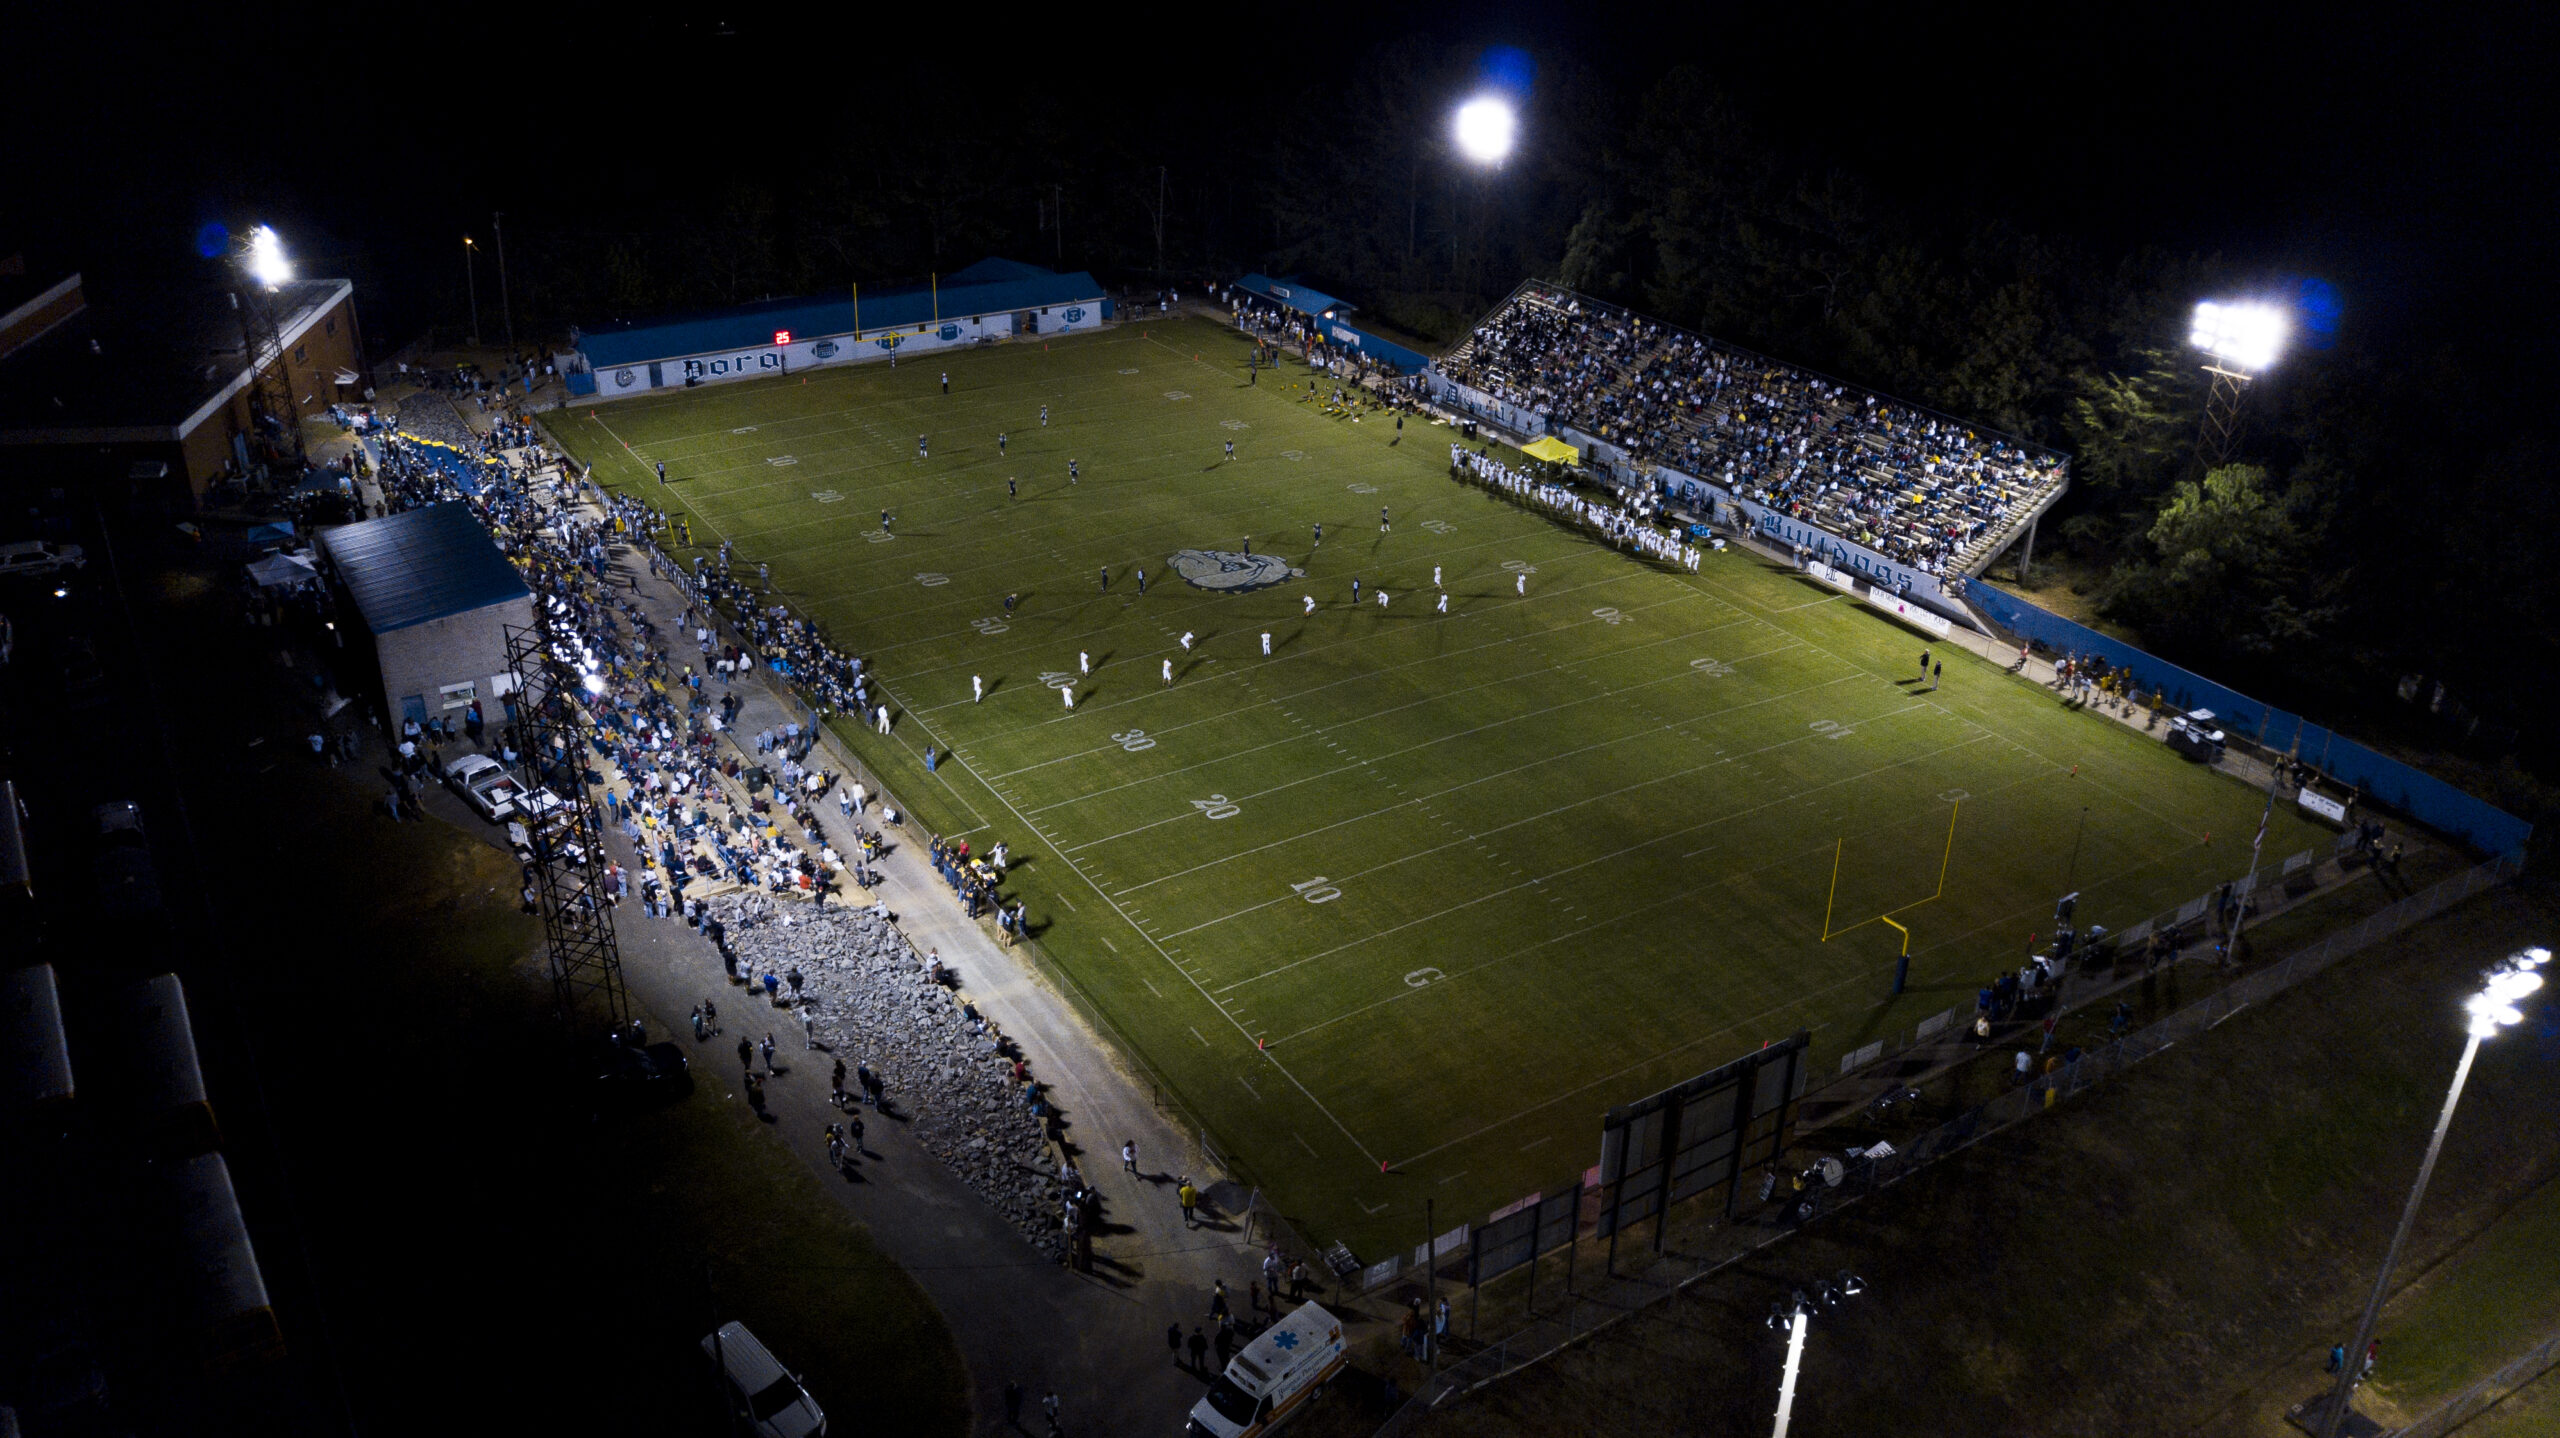 An areal view of Horace Roberts Field. (Jeffery Winborne)